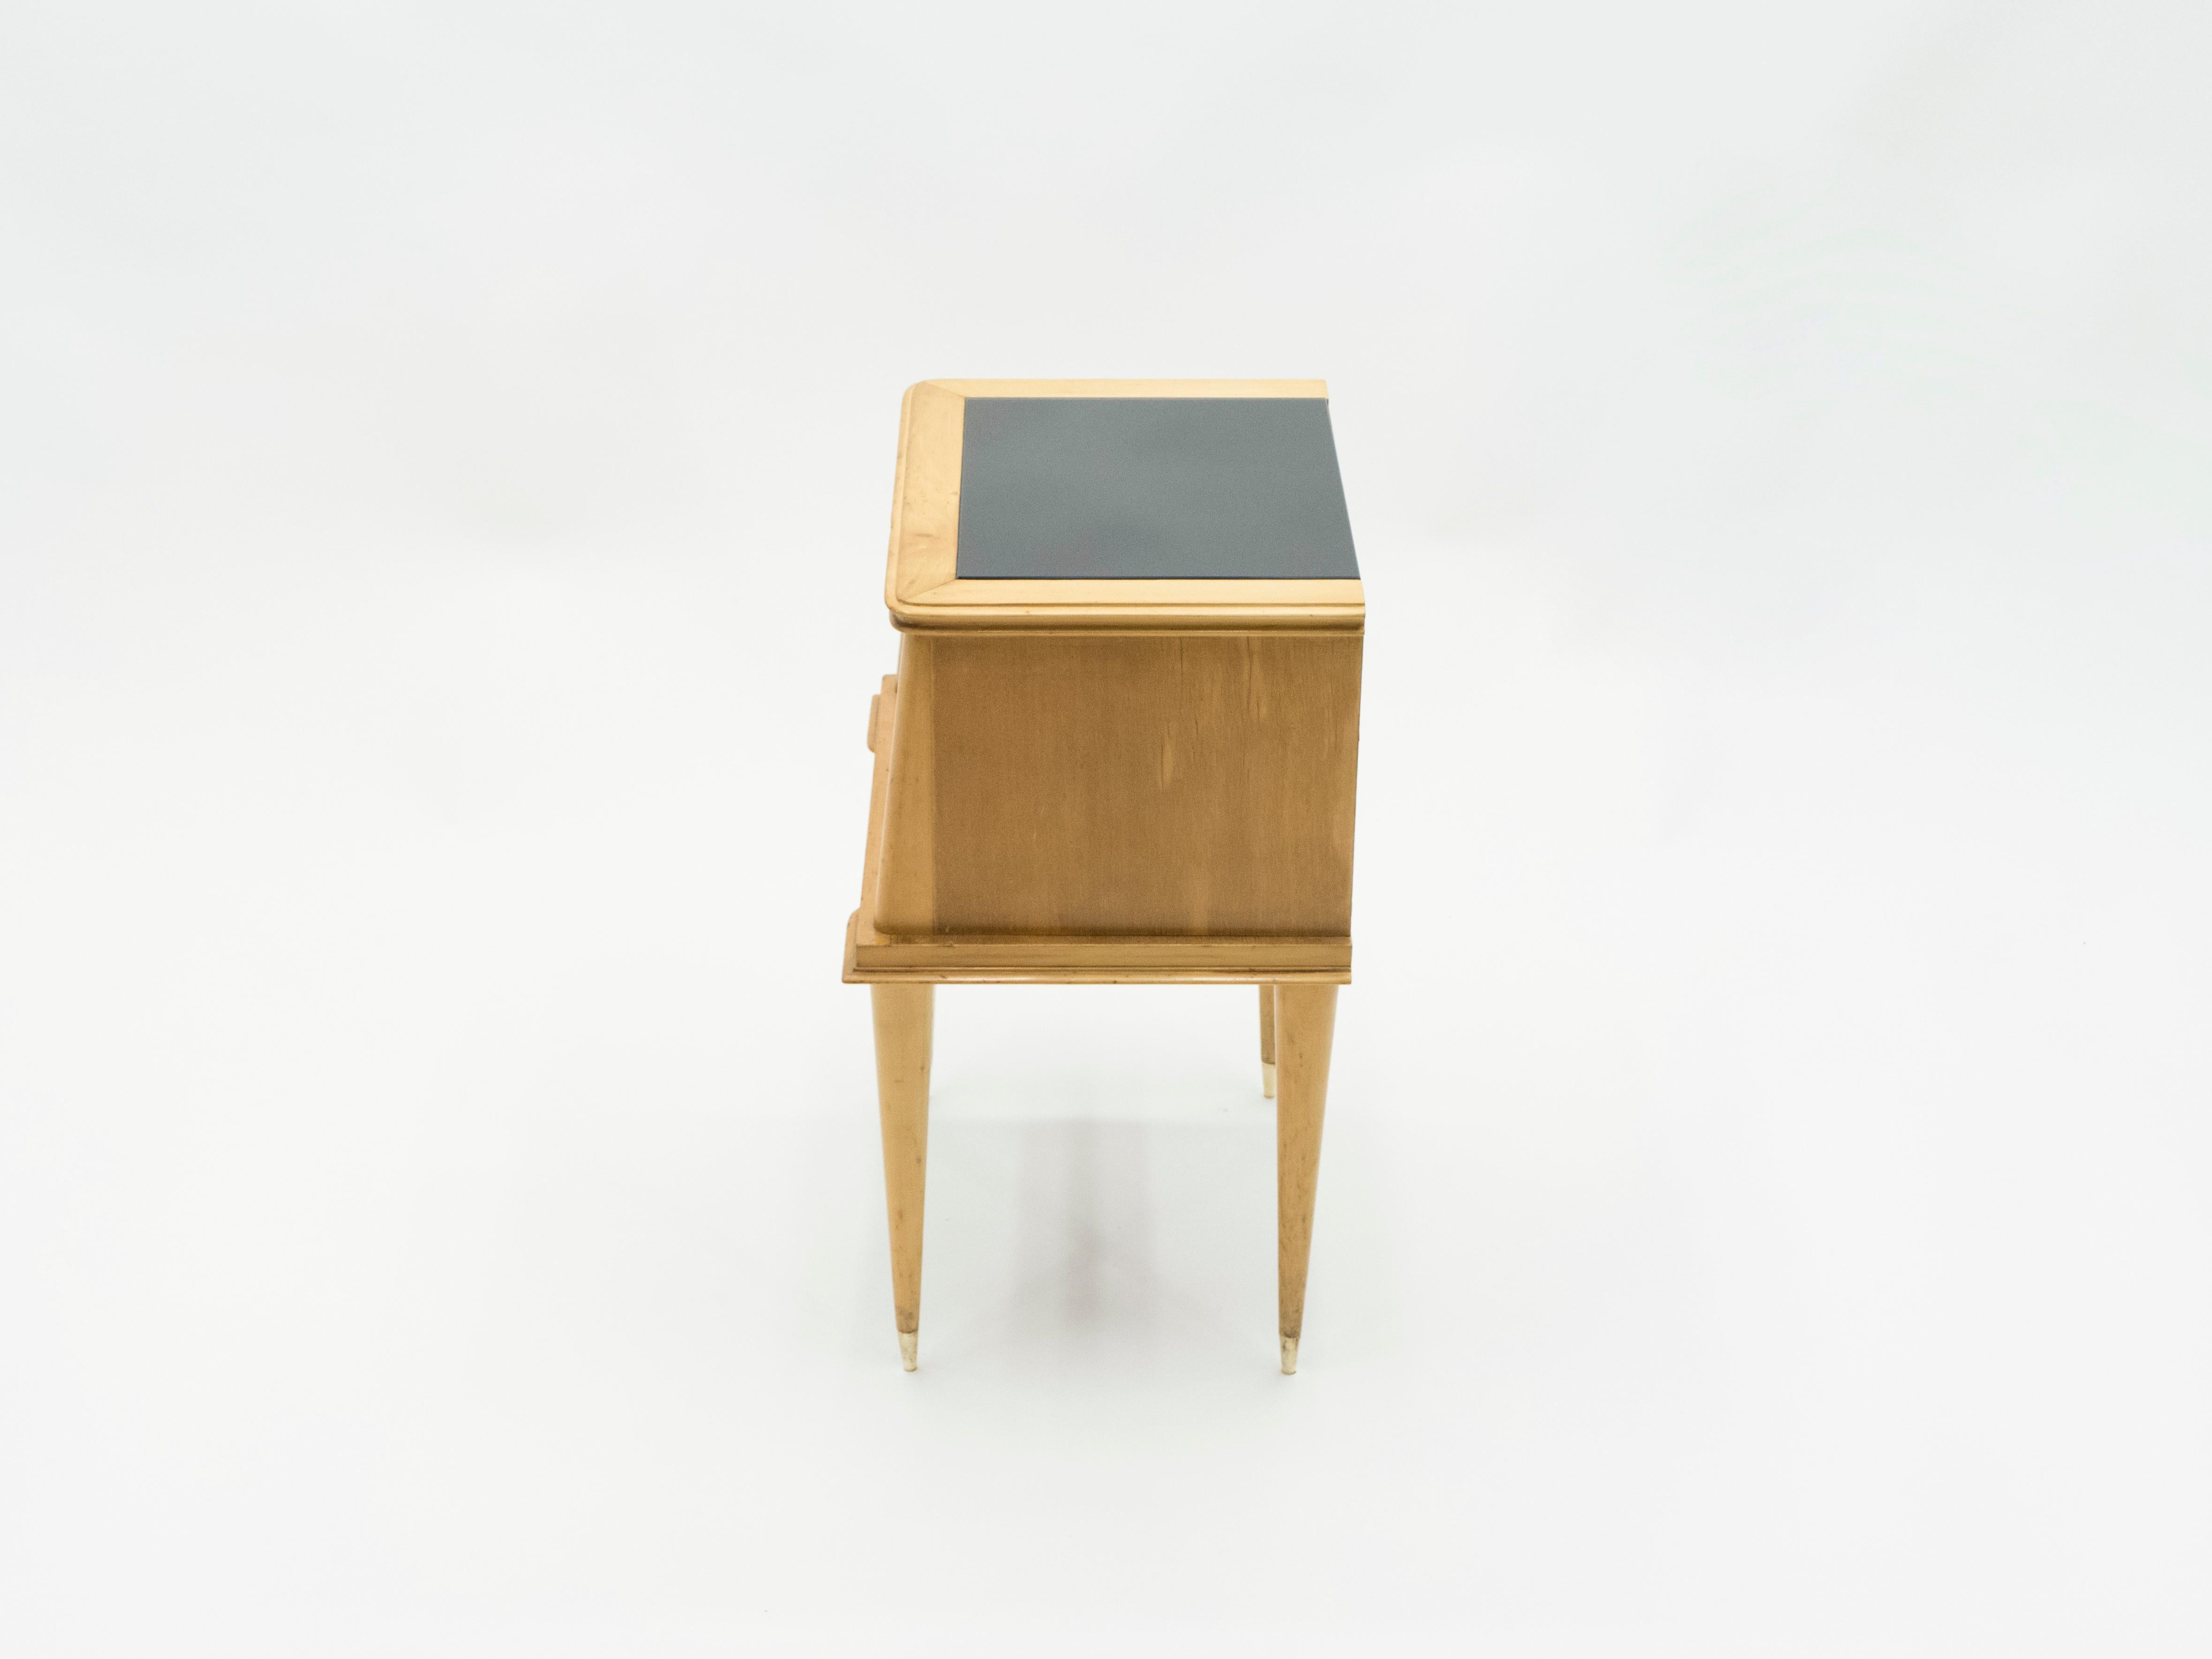 French Sycamore Nightstands 2 Drawers Attributed to Suzanne Guiguichon, 1950s For Sale 2